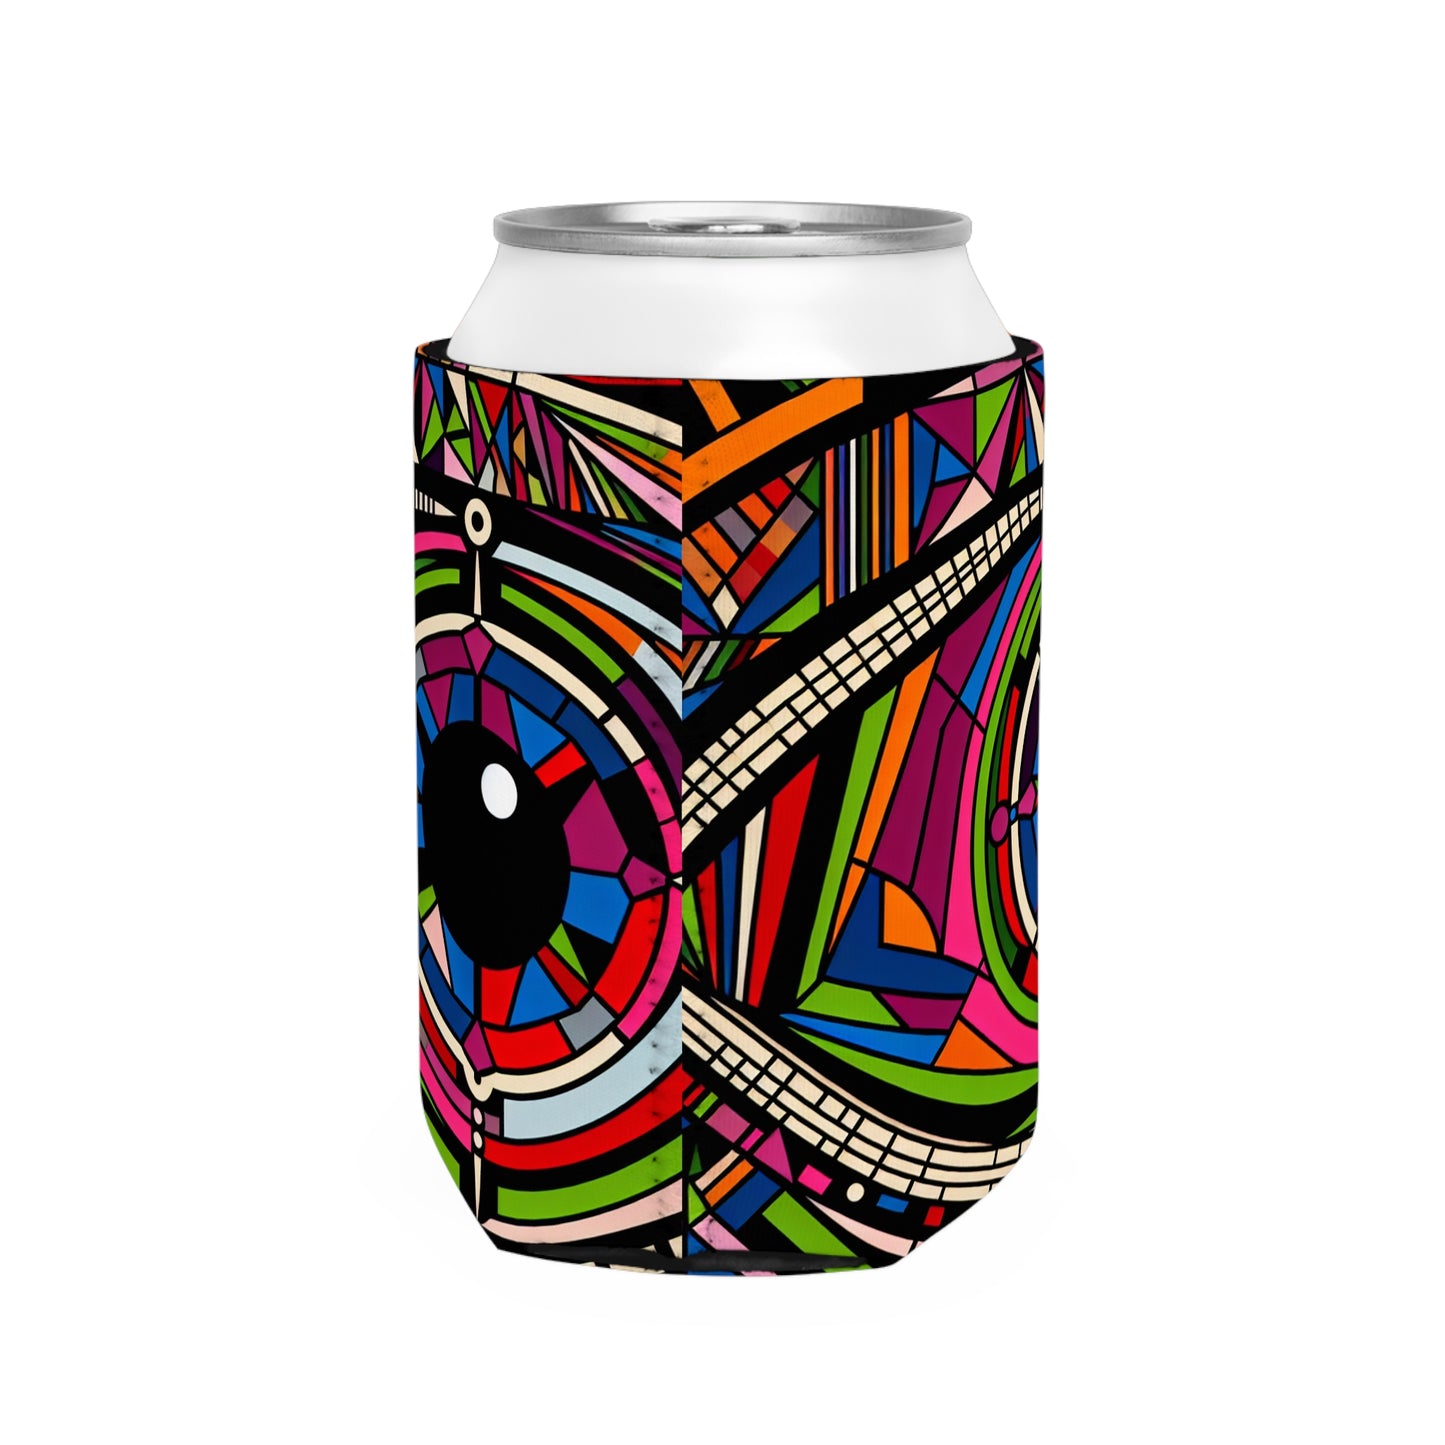 "Eye of the Illusionist". - The Alien Can Cooler Sleeve Op Art Style